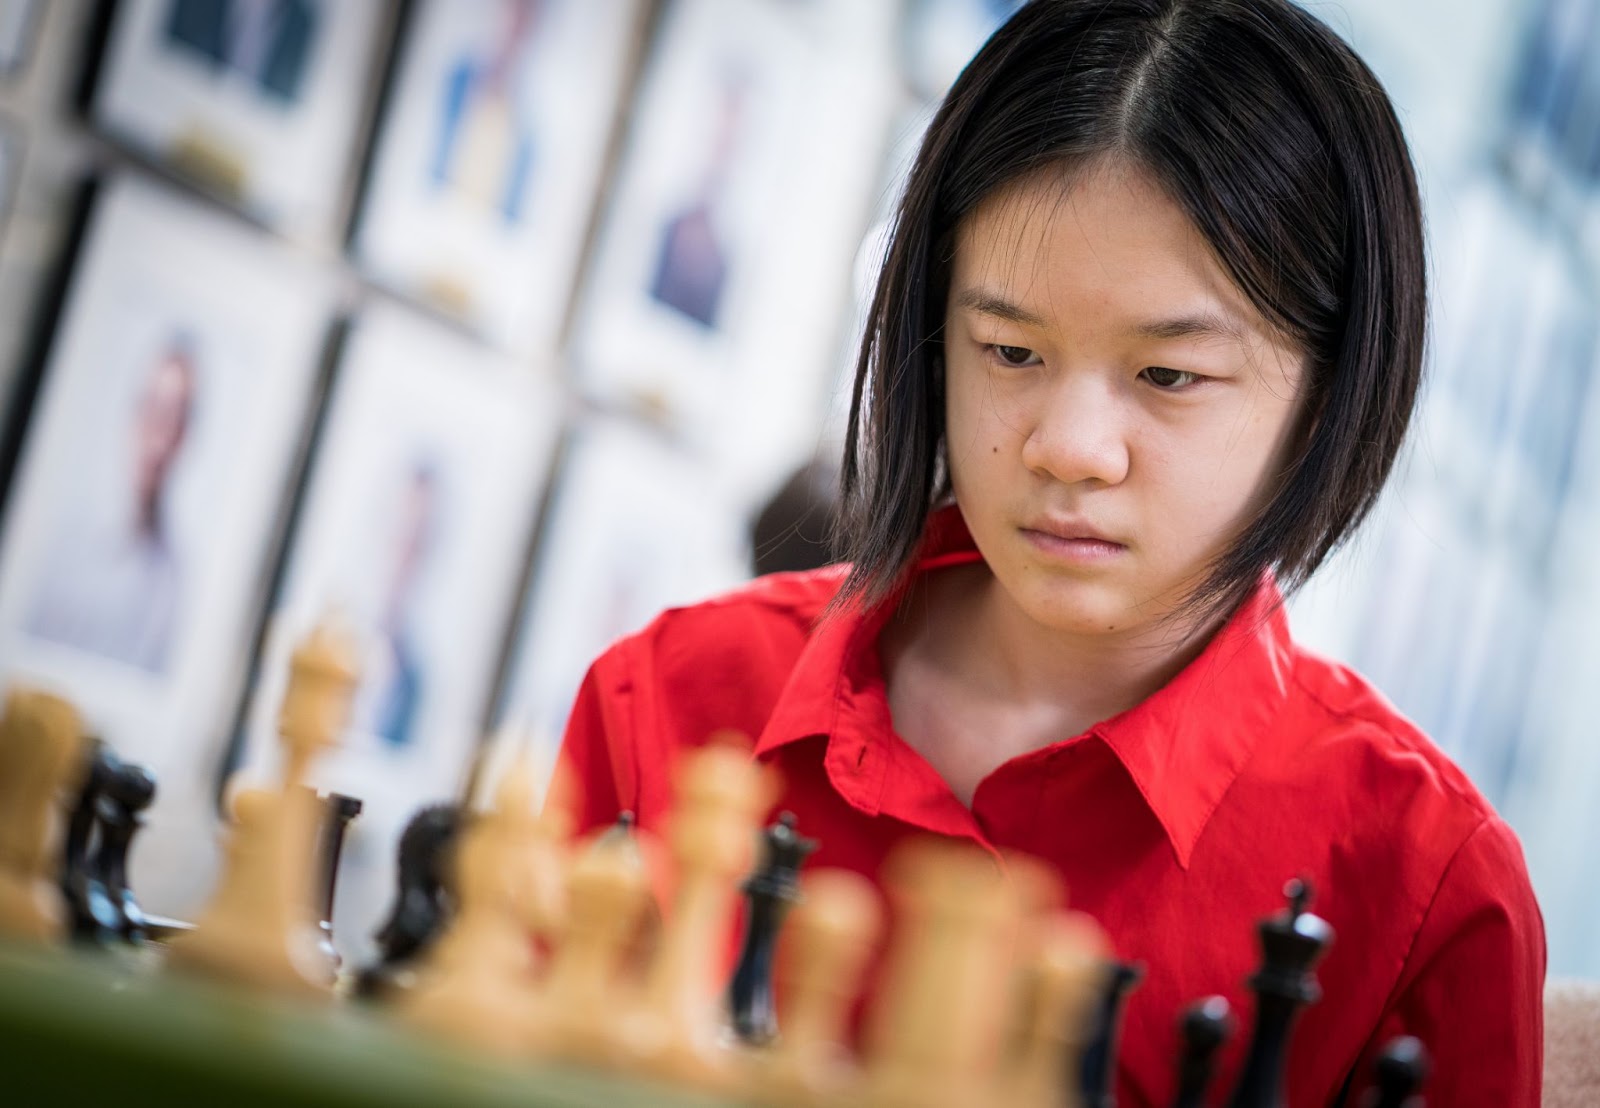 A Rising Chess Star: An interview with Alice Lee